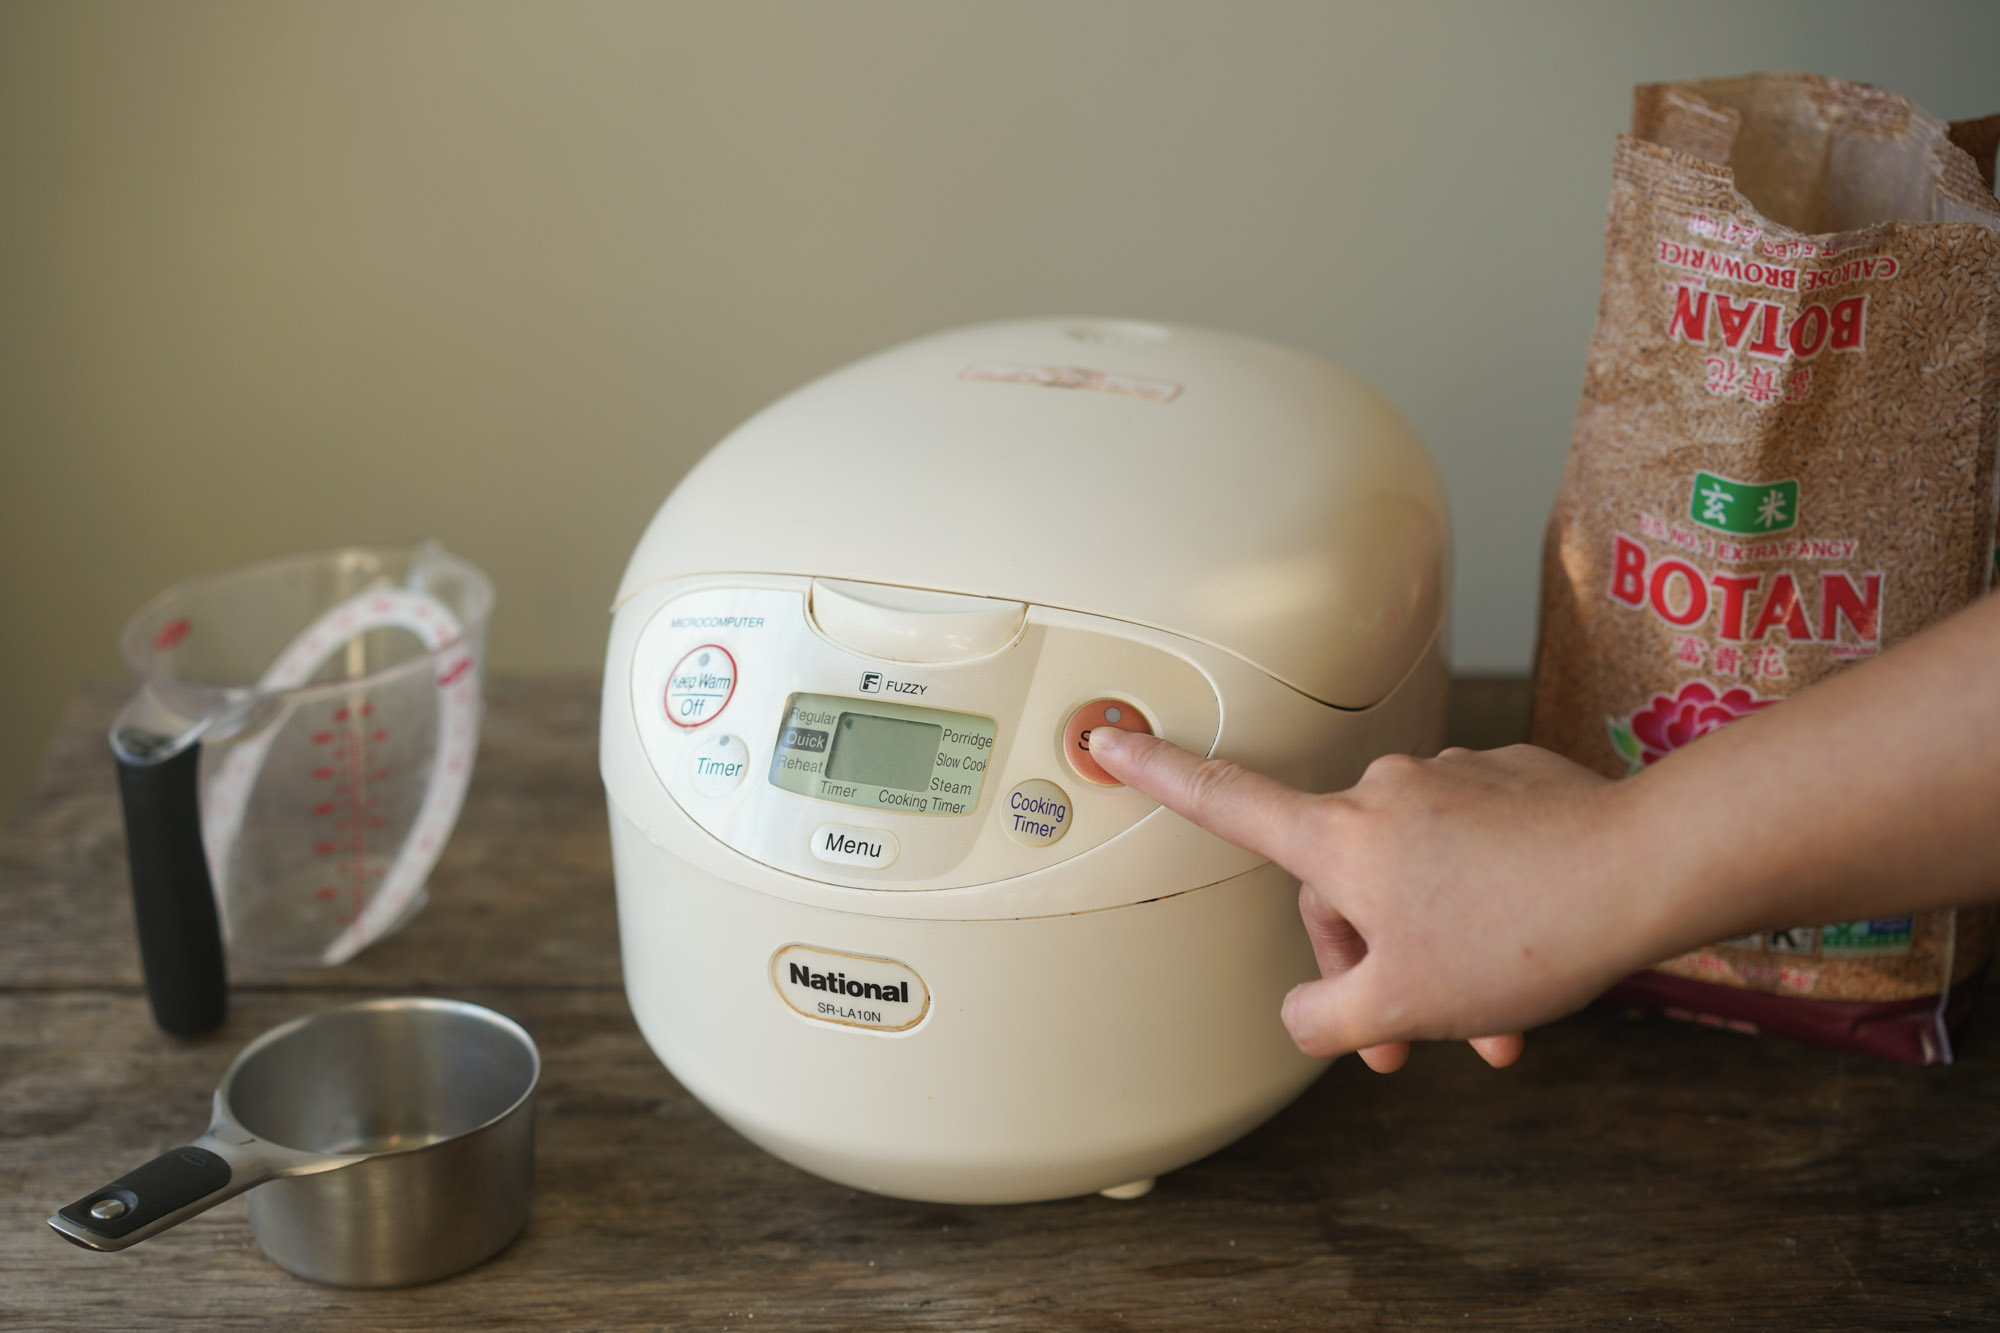 Full Steam Ahead: Picking the Right Rice Cooker